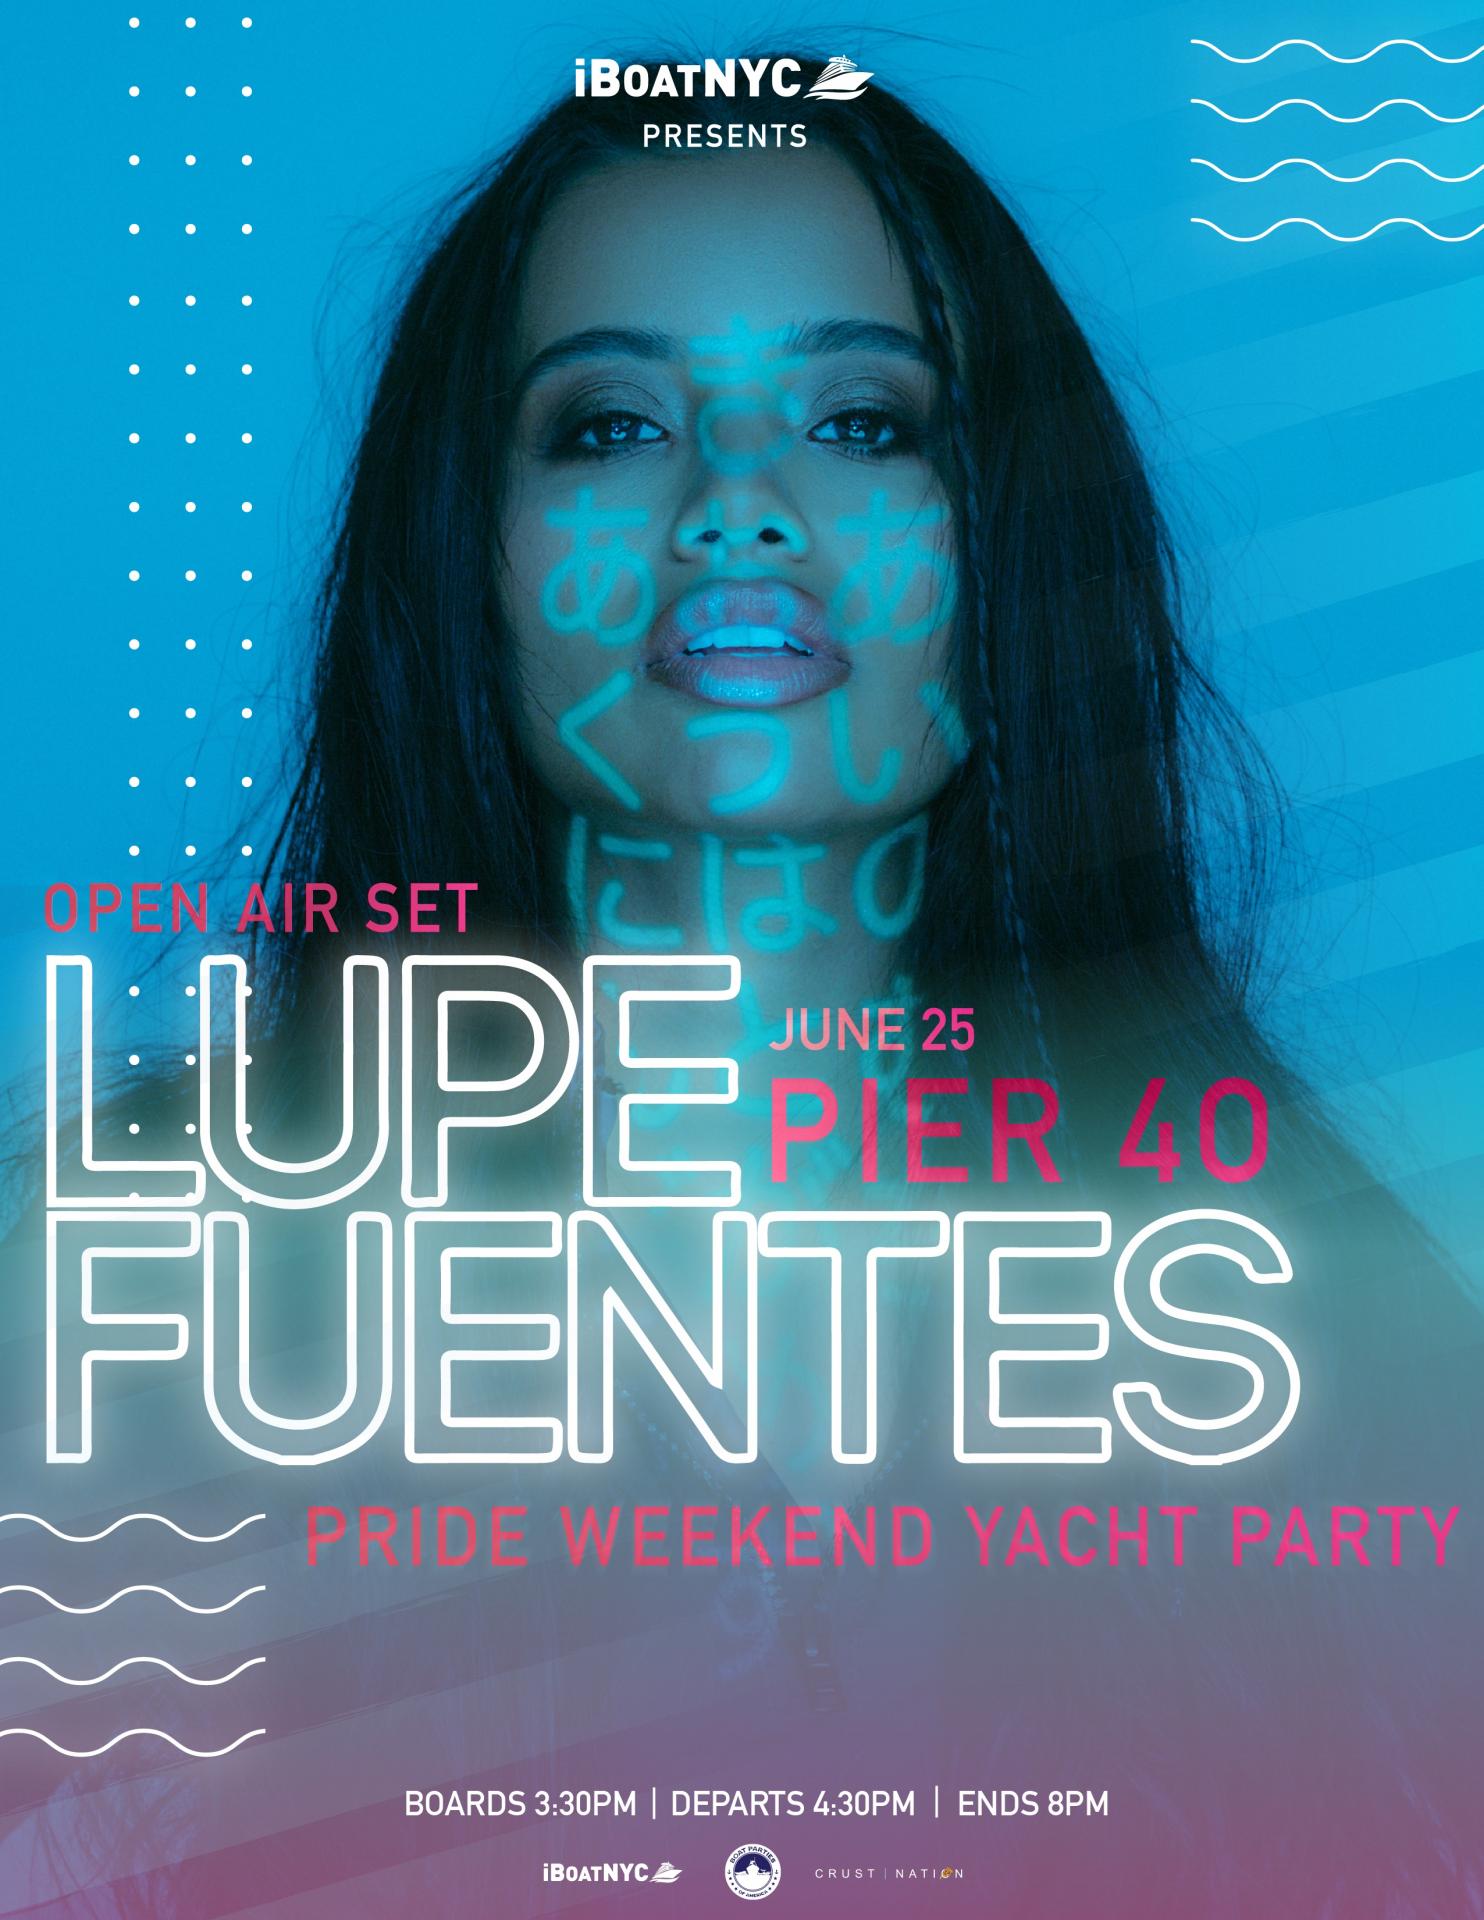 LUPE FUENTES - iBoatNYC Open Air | Pride Weekend NYC Yacht Cruise